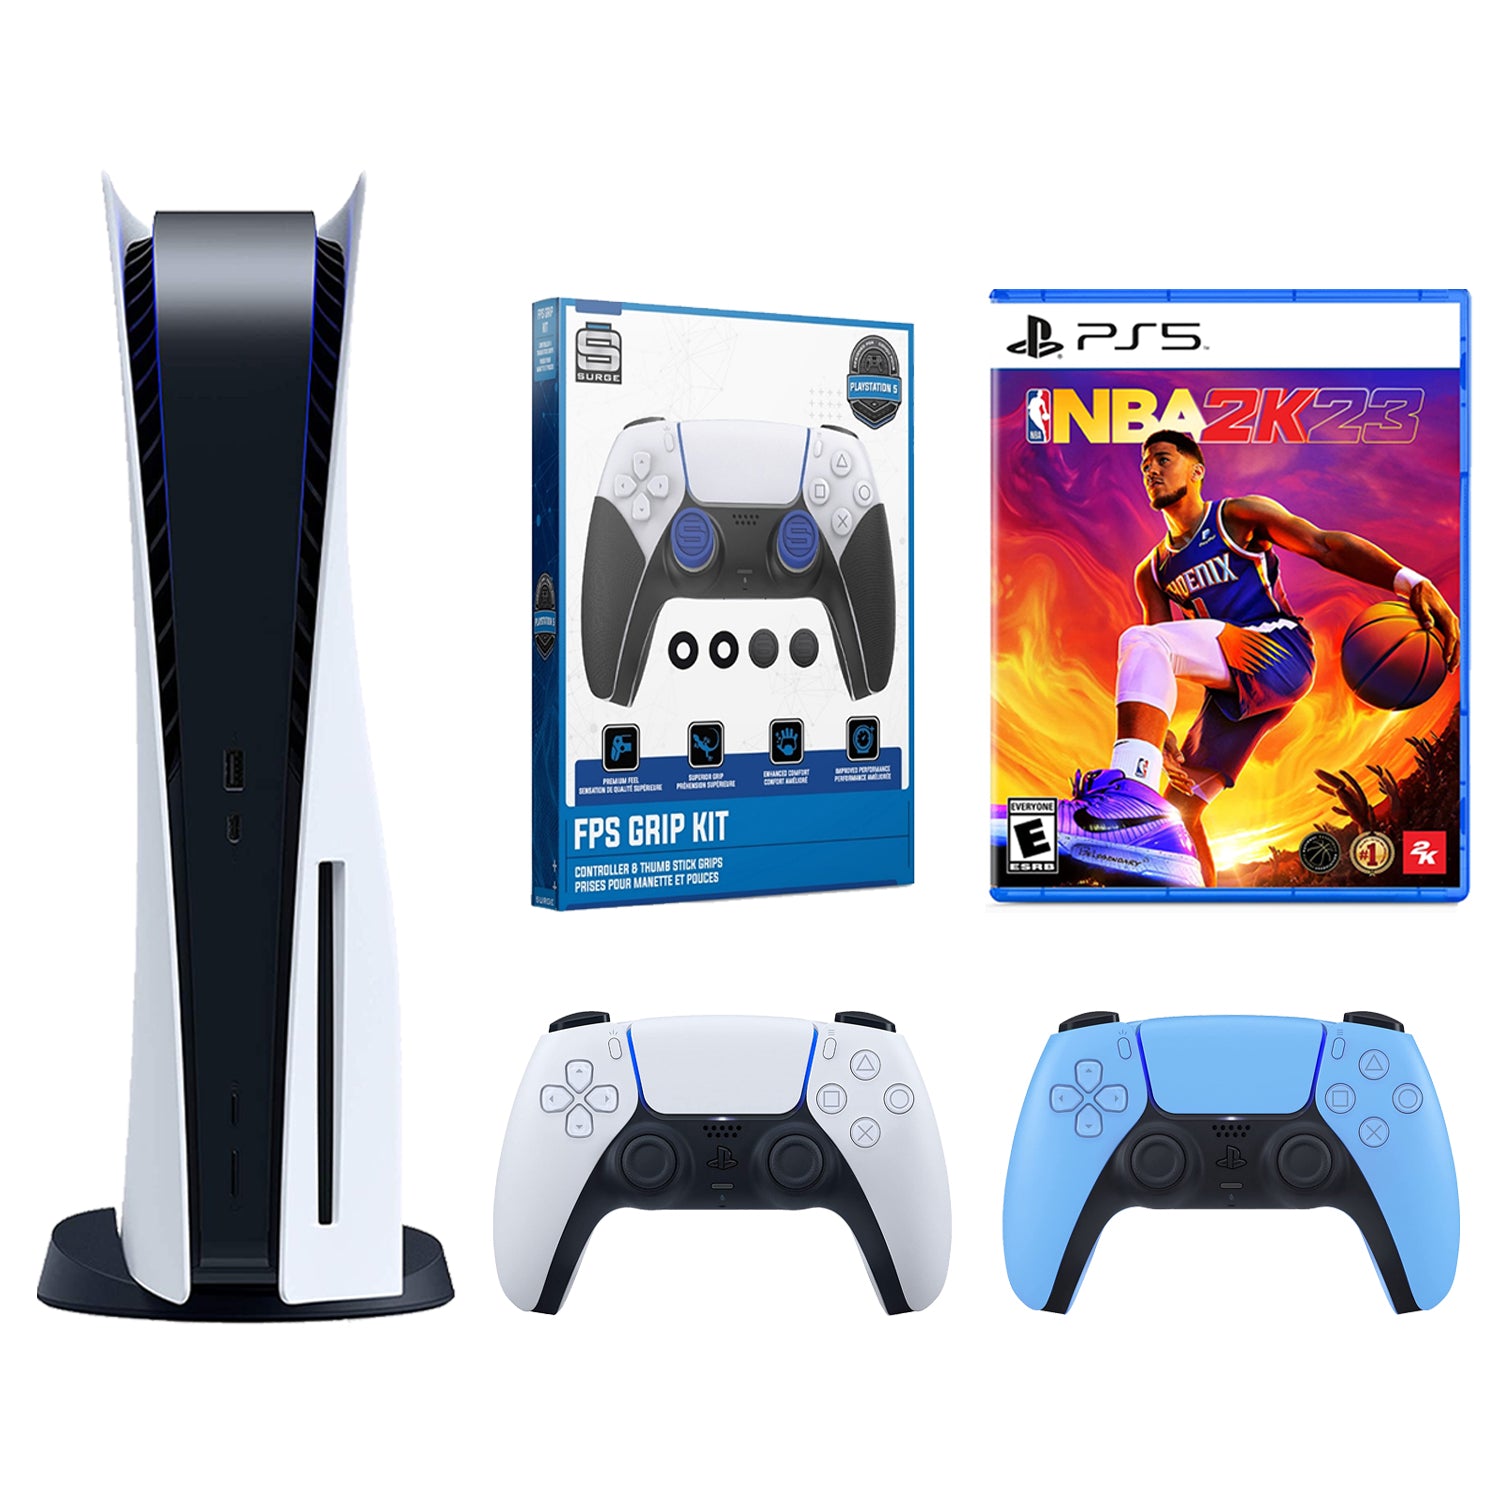 Sony Playstation 5 Disc with NBA 2K23, Extra Controller and FPS Grip Kit Bundle - Starlight Blue - Pro-Distributing